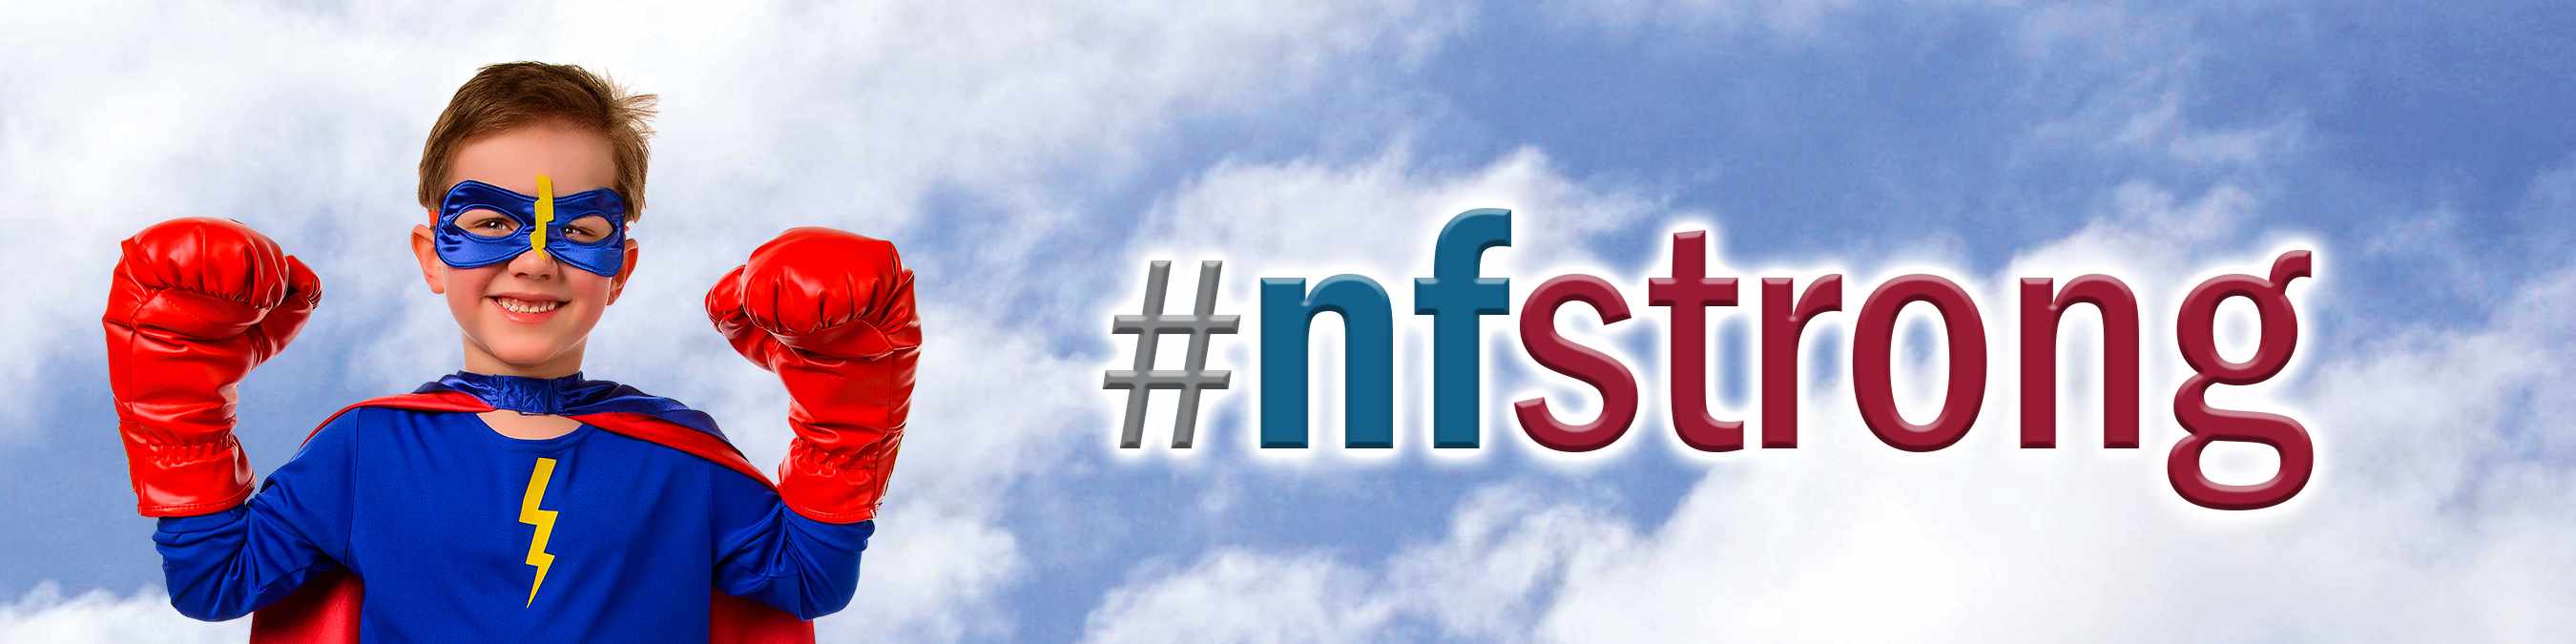 Logo banner with a little boy in a super hero costume for Neurofibromatosis (NF) 